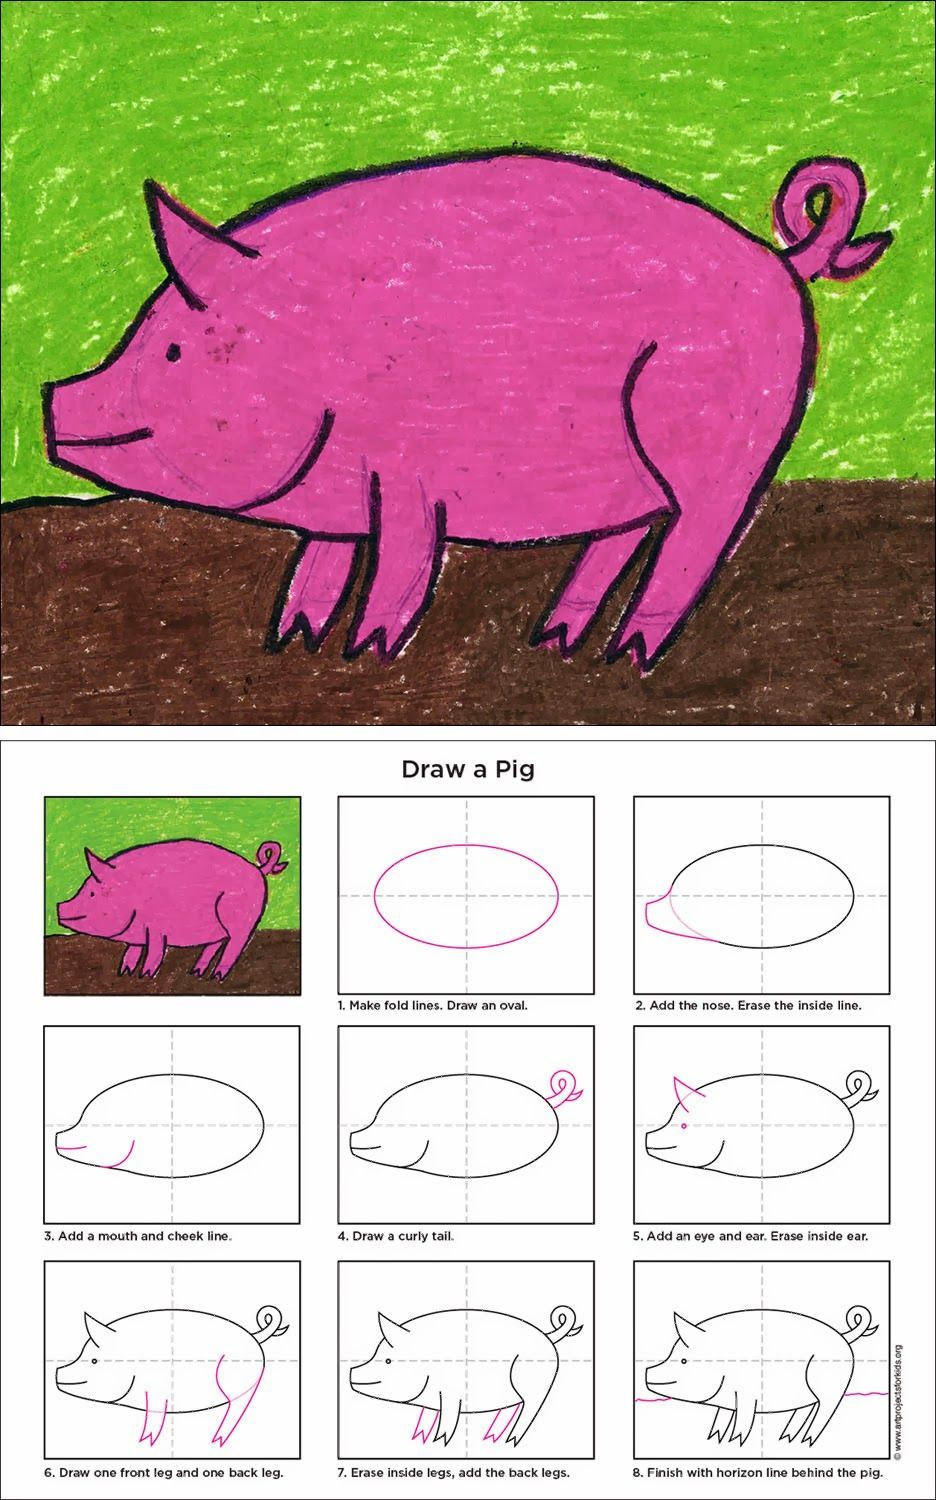 How to Draw a Pig – ART PROJECTS FOR KIDS